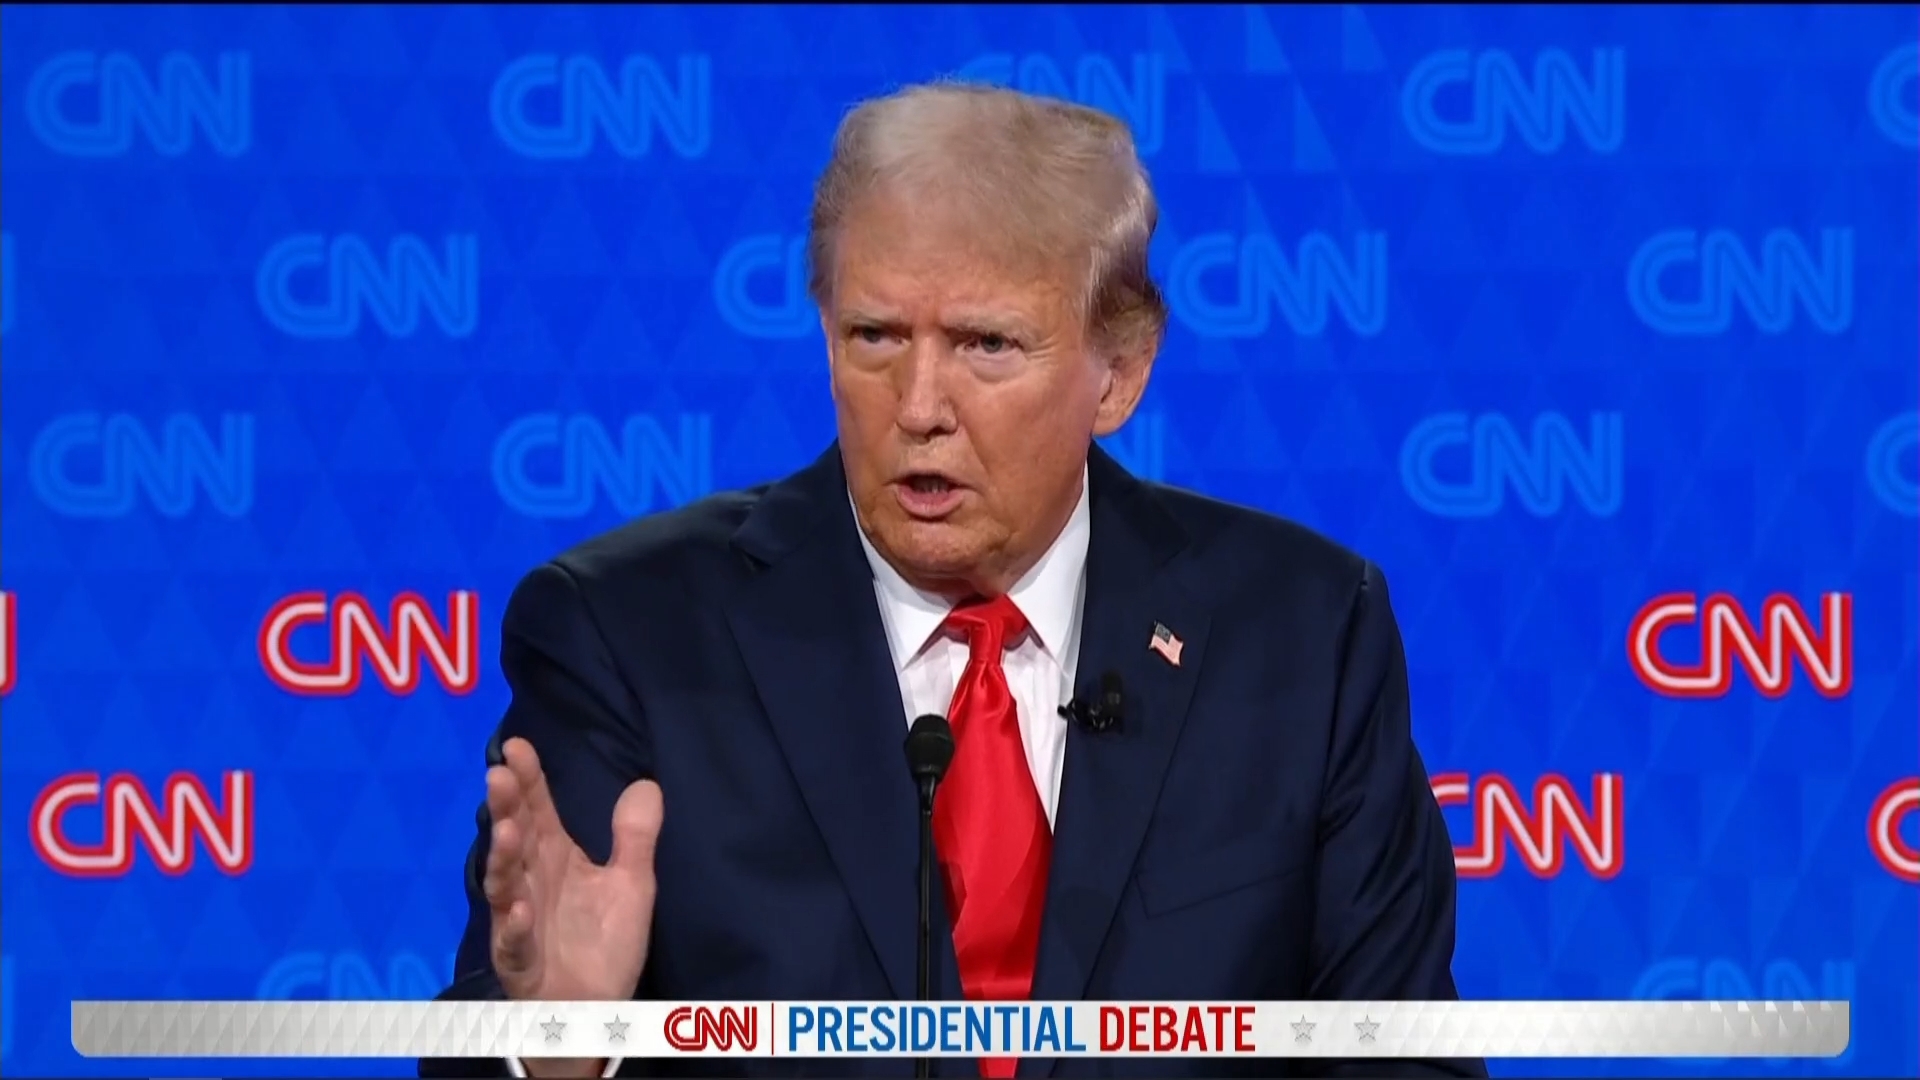 "If it's a fair and legal and good election, absolutely," Trump said. "There's nothing I'd rather do." Biden, in response, called Trump "such a whiner."